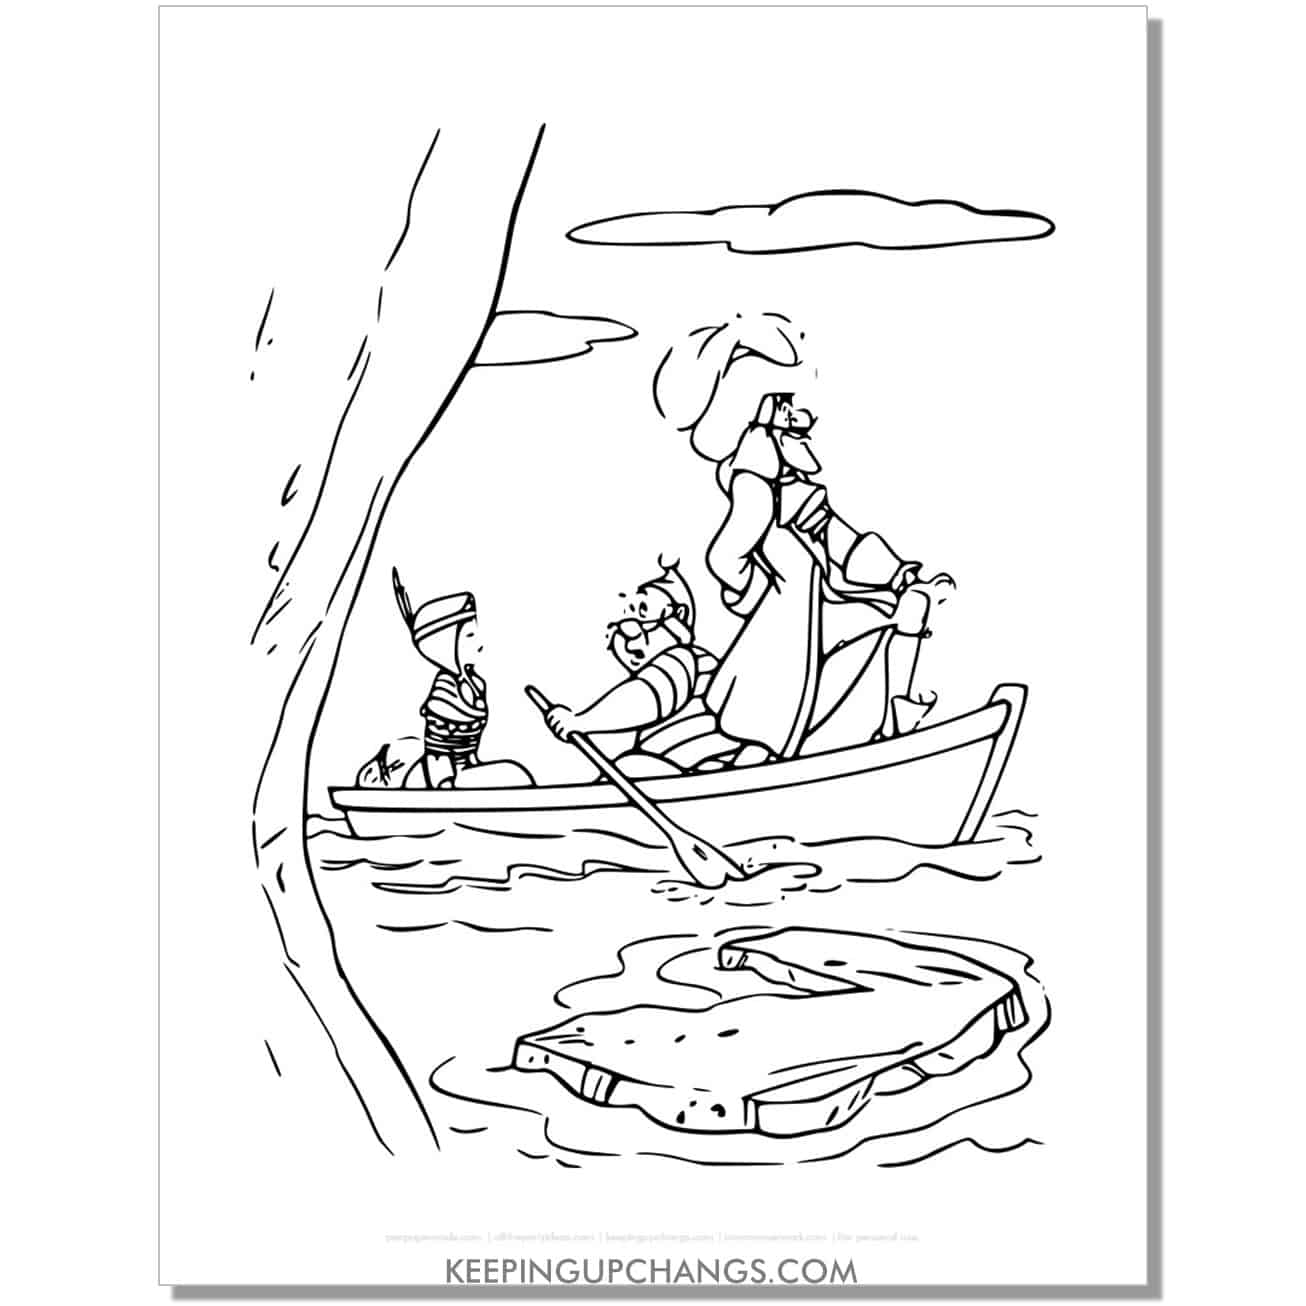 captain hook and mr smee take tiger lily by boat coloring page, sheet.